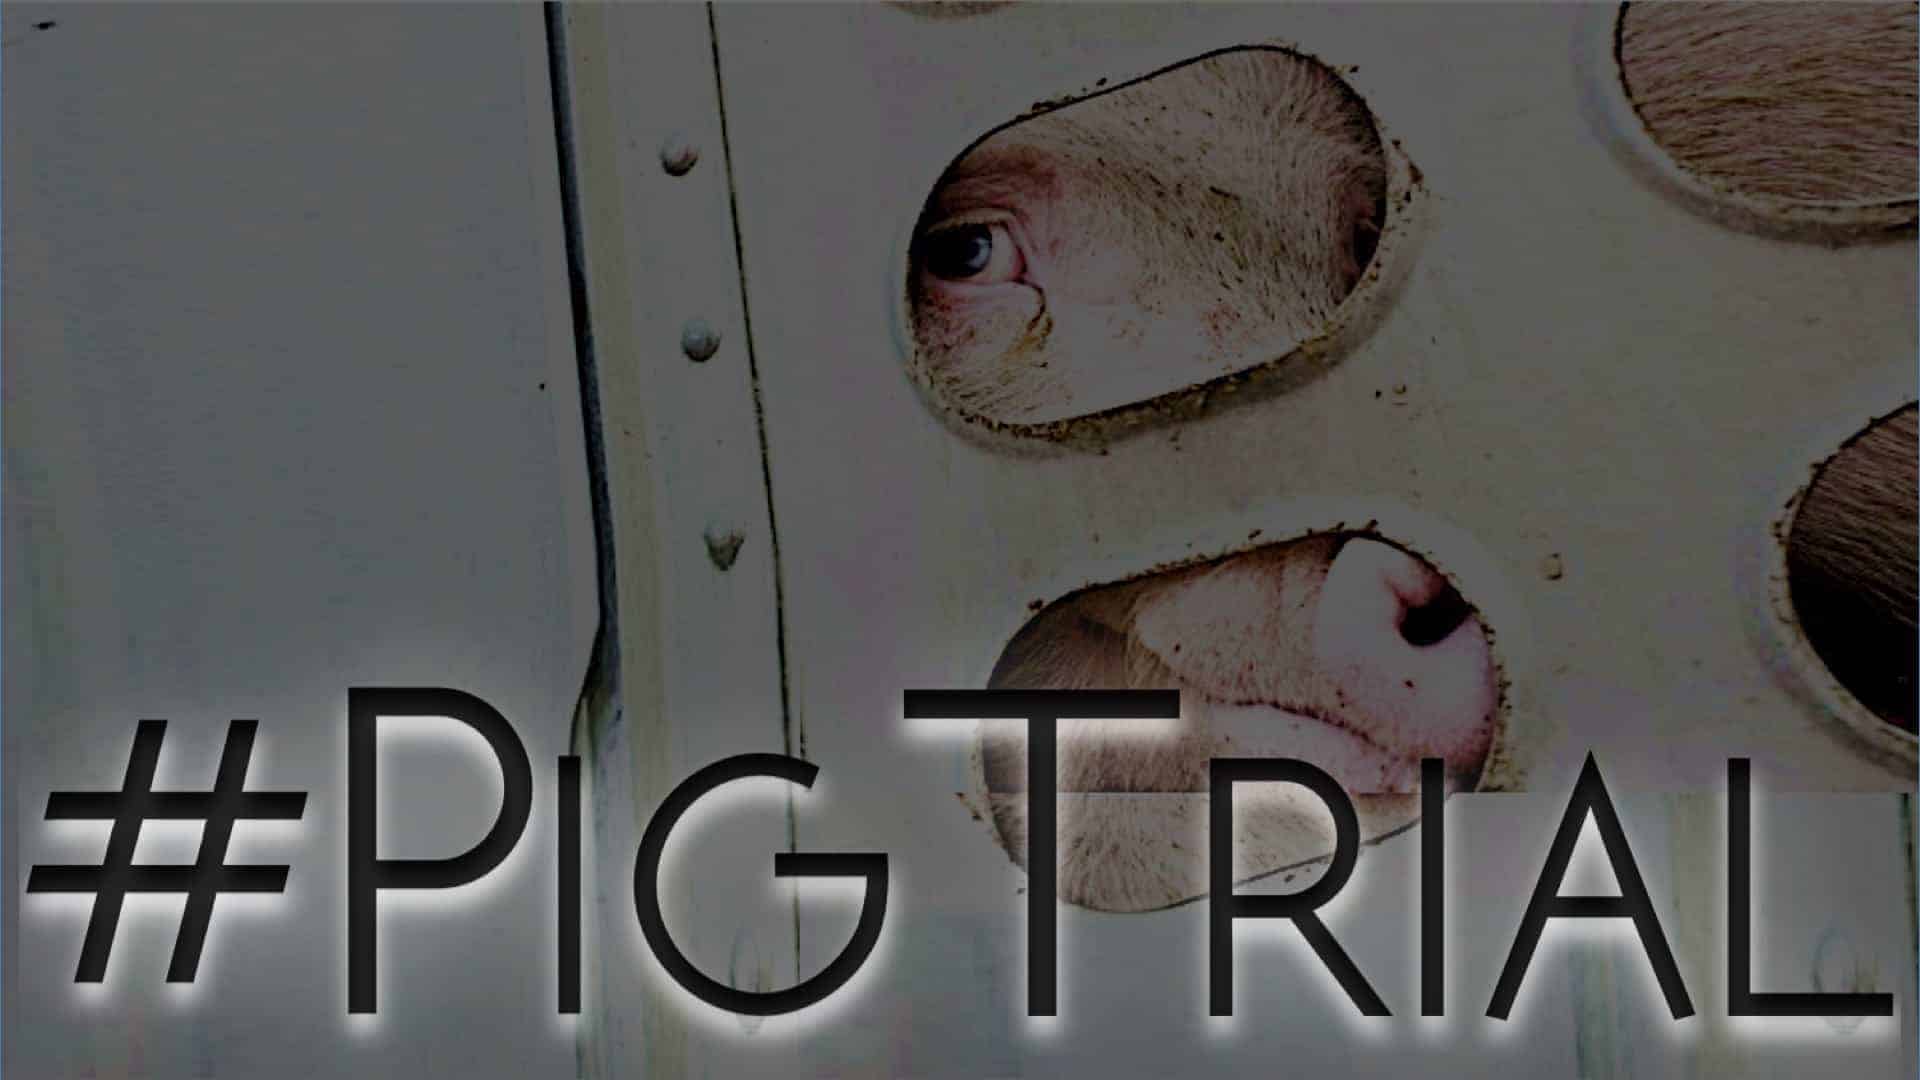 A pig looking out through the small metal holes in the side of a "livestock" truck on the way to slaughter with the text "#PigTrial" below, denoting the trial of activist Anita Krajnc.